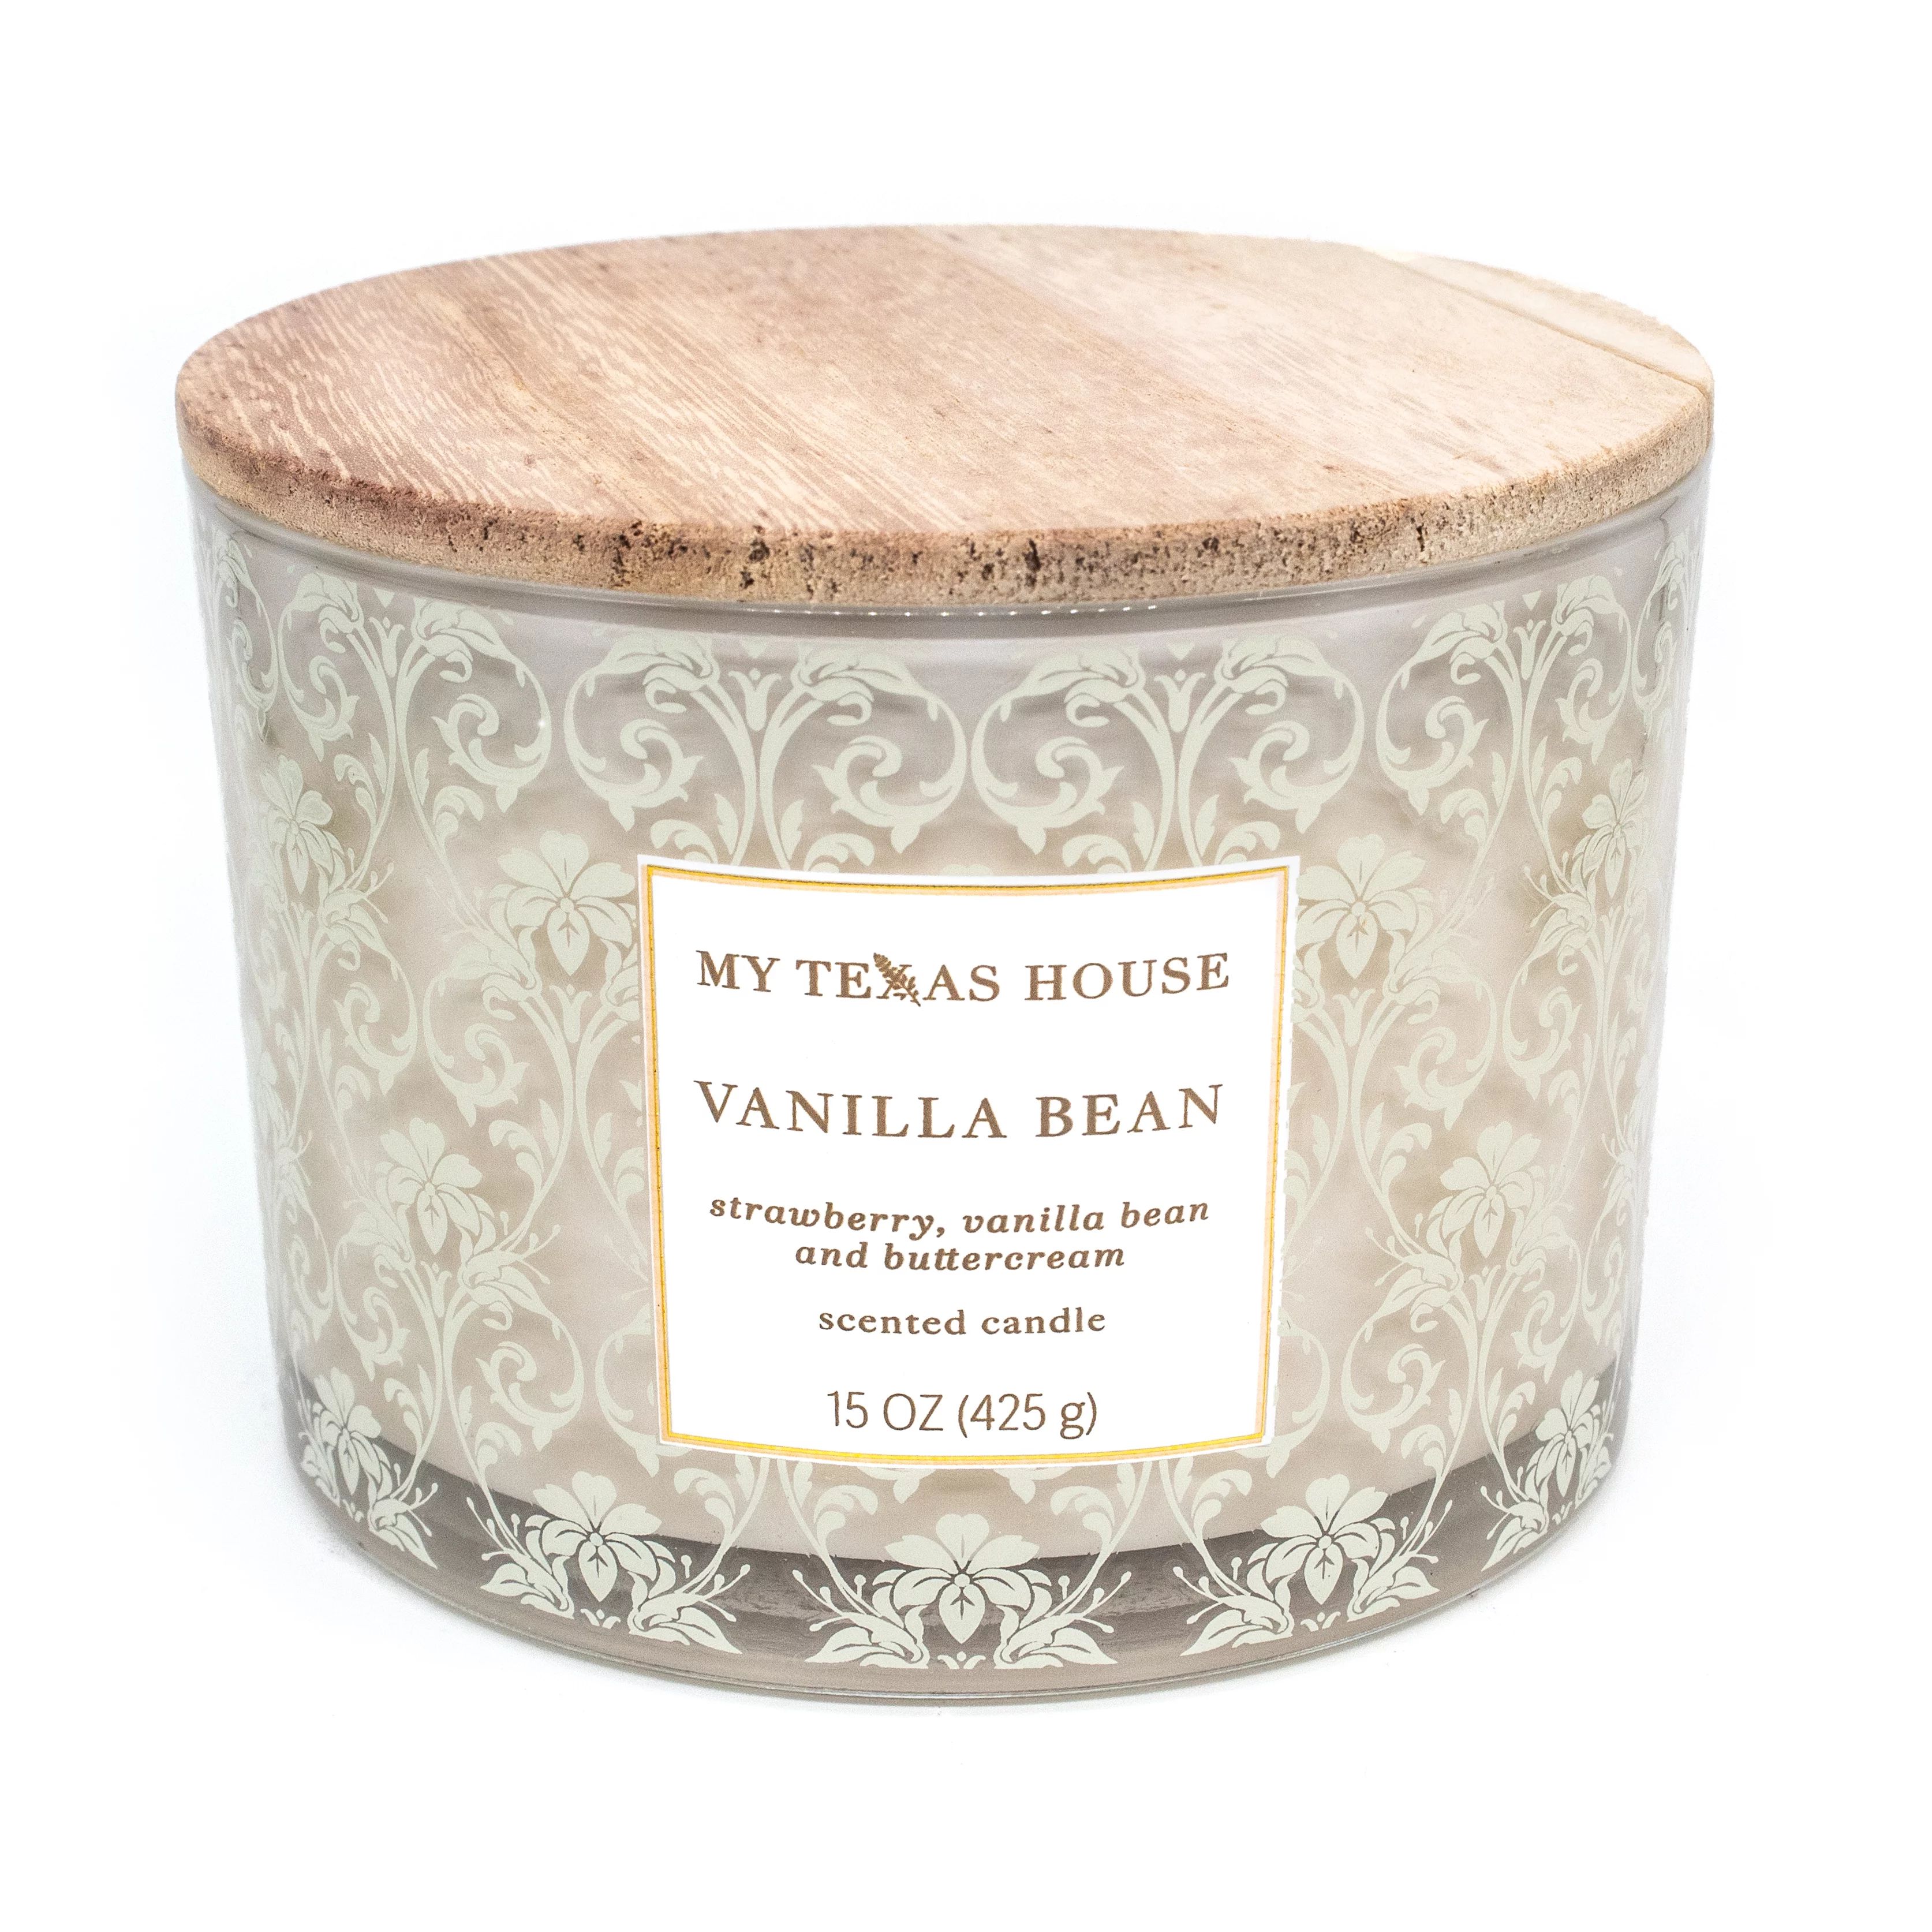 My Texas House, Vanilla Bean 3-wick Candle, 15oz with 35-40 hr Burn Time | Walmart (US)